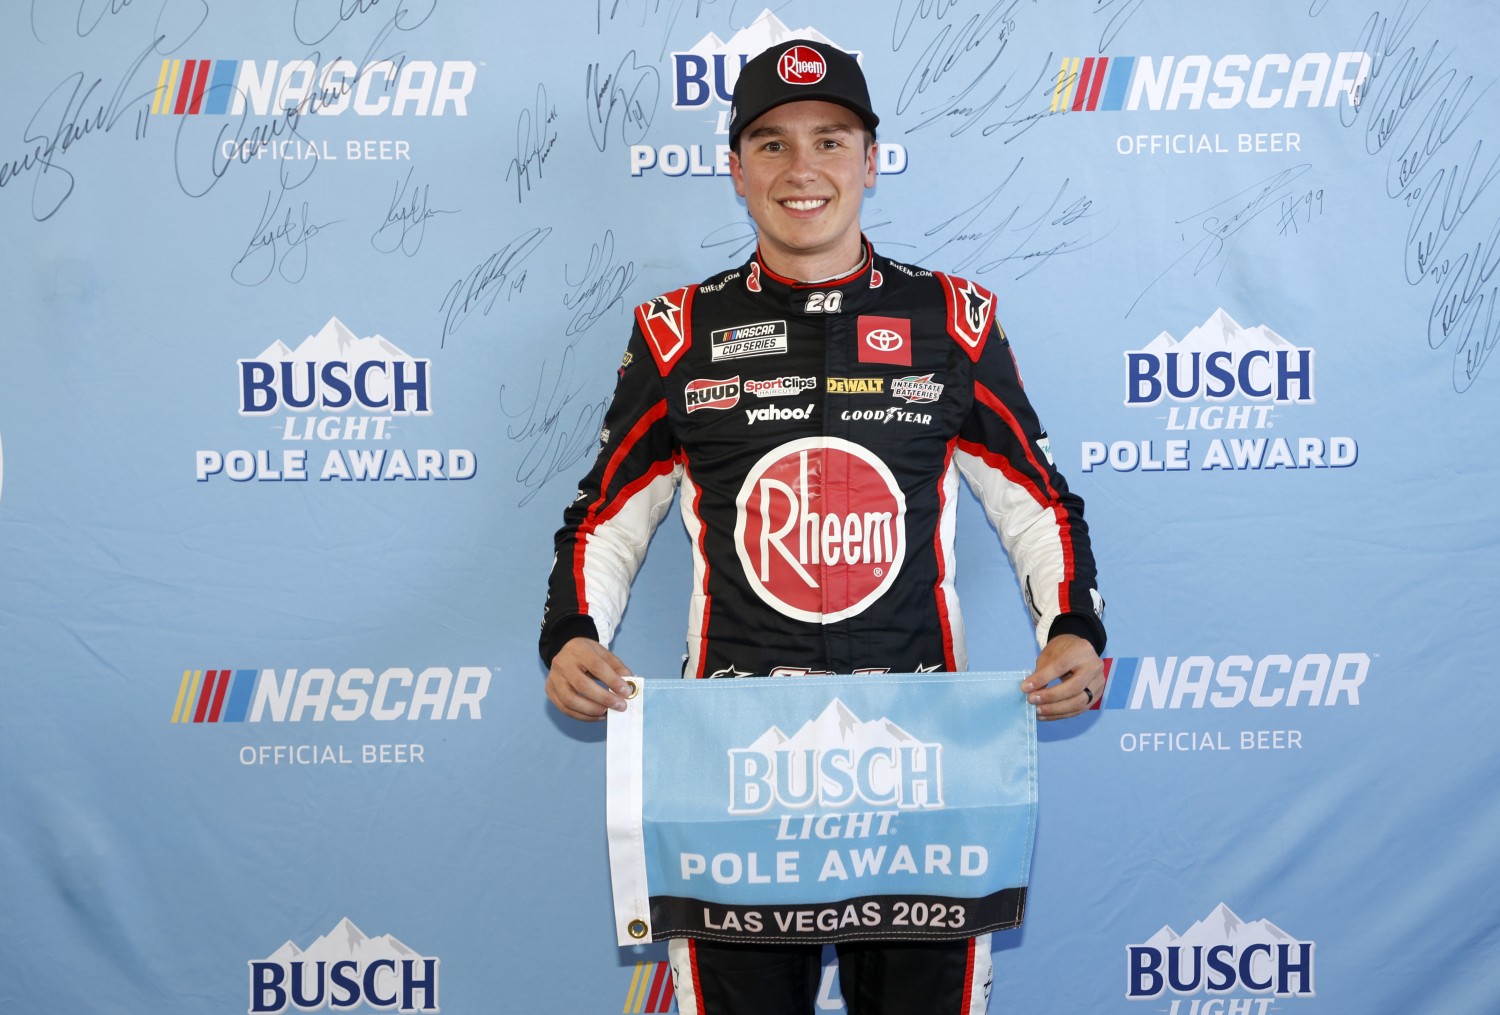 Christopher Bell, driver of the #20 Rheem/Smurfit Kappa Toyota, poses for photos after winning the pole award during qualifying for the NASCAR Cup Series South Point 400 at Las Vegas Motor Speedway on October 14, 2023 in Las Vegas, Nevada. (Photo by Chris Graythen/Getty Images)